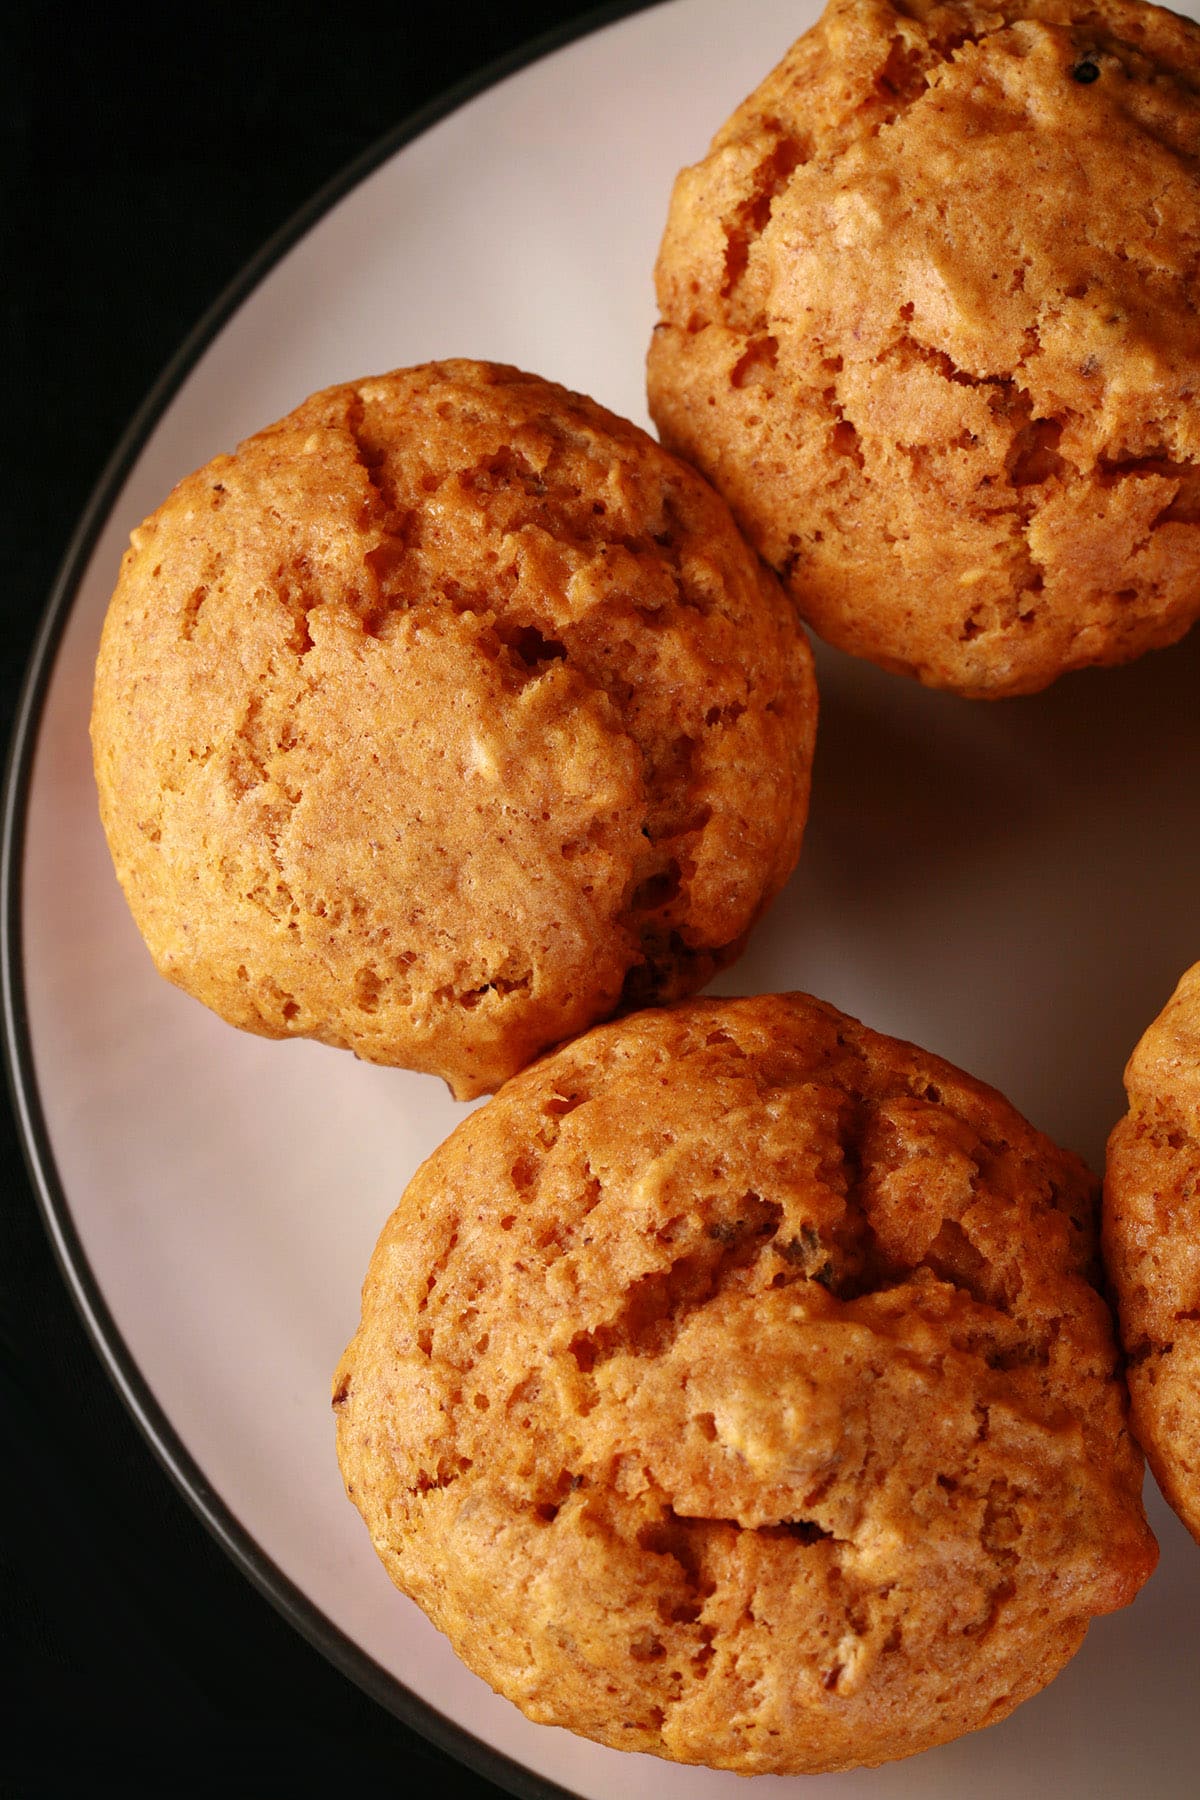 Several maple pumpkin muffins on a plate.